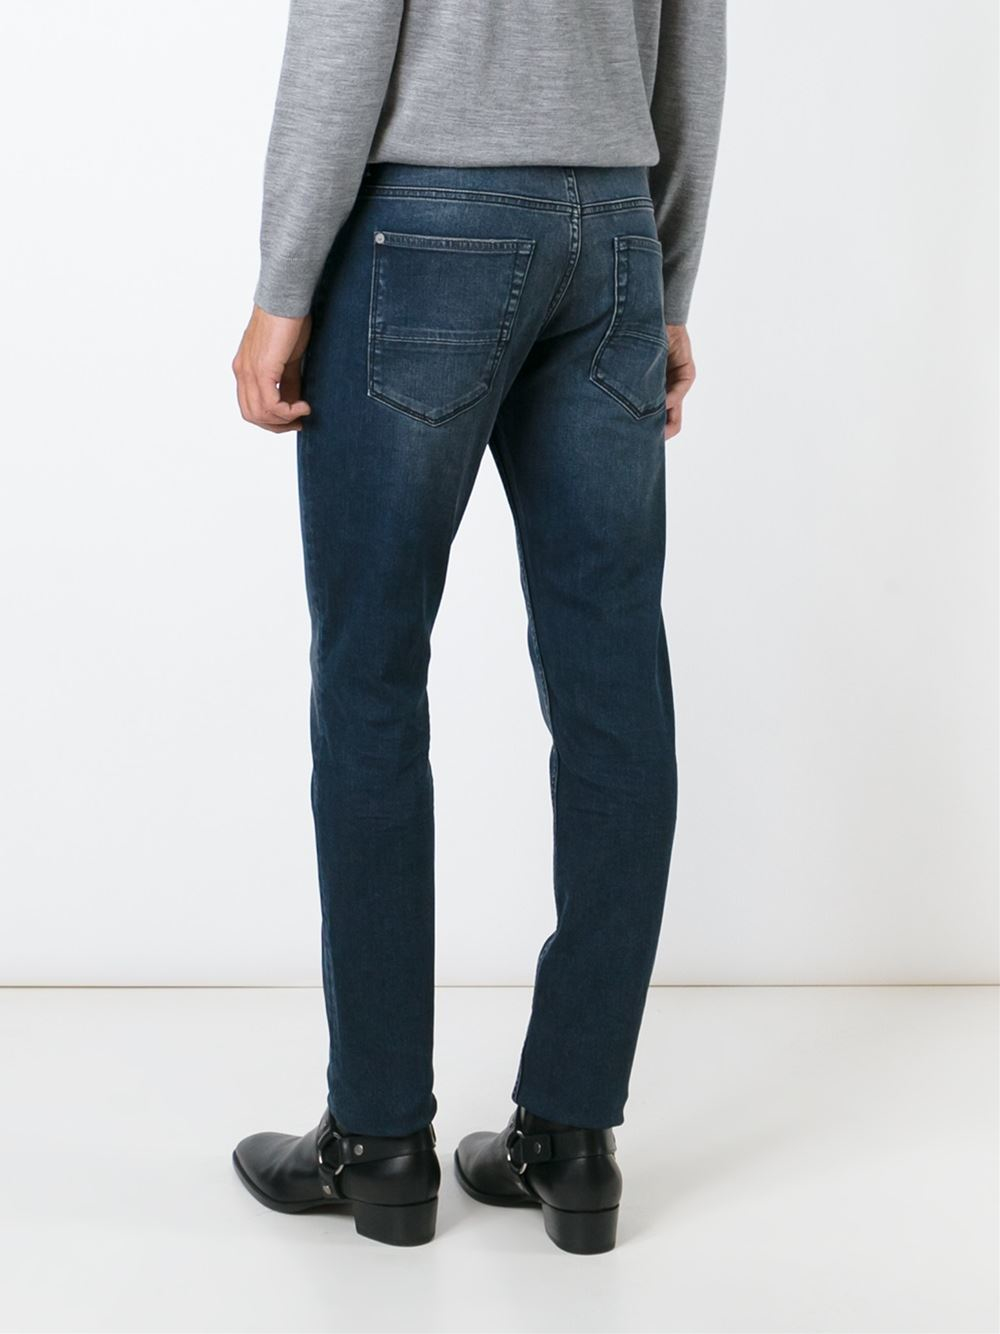 7 For All Mankind Denim 'ronnie' Jeans in Blue for Men - Lyst